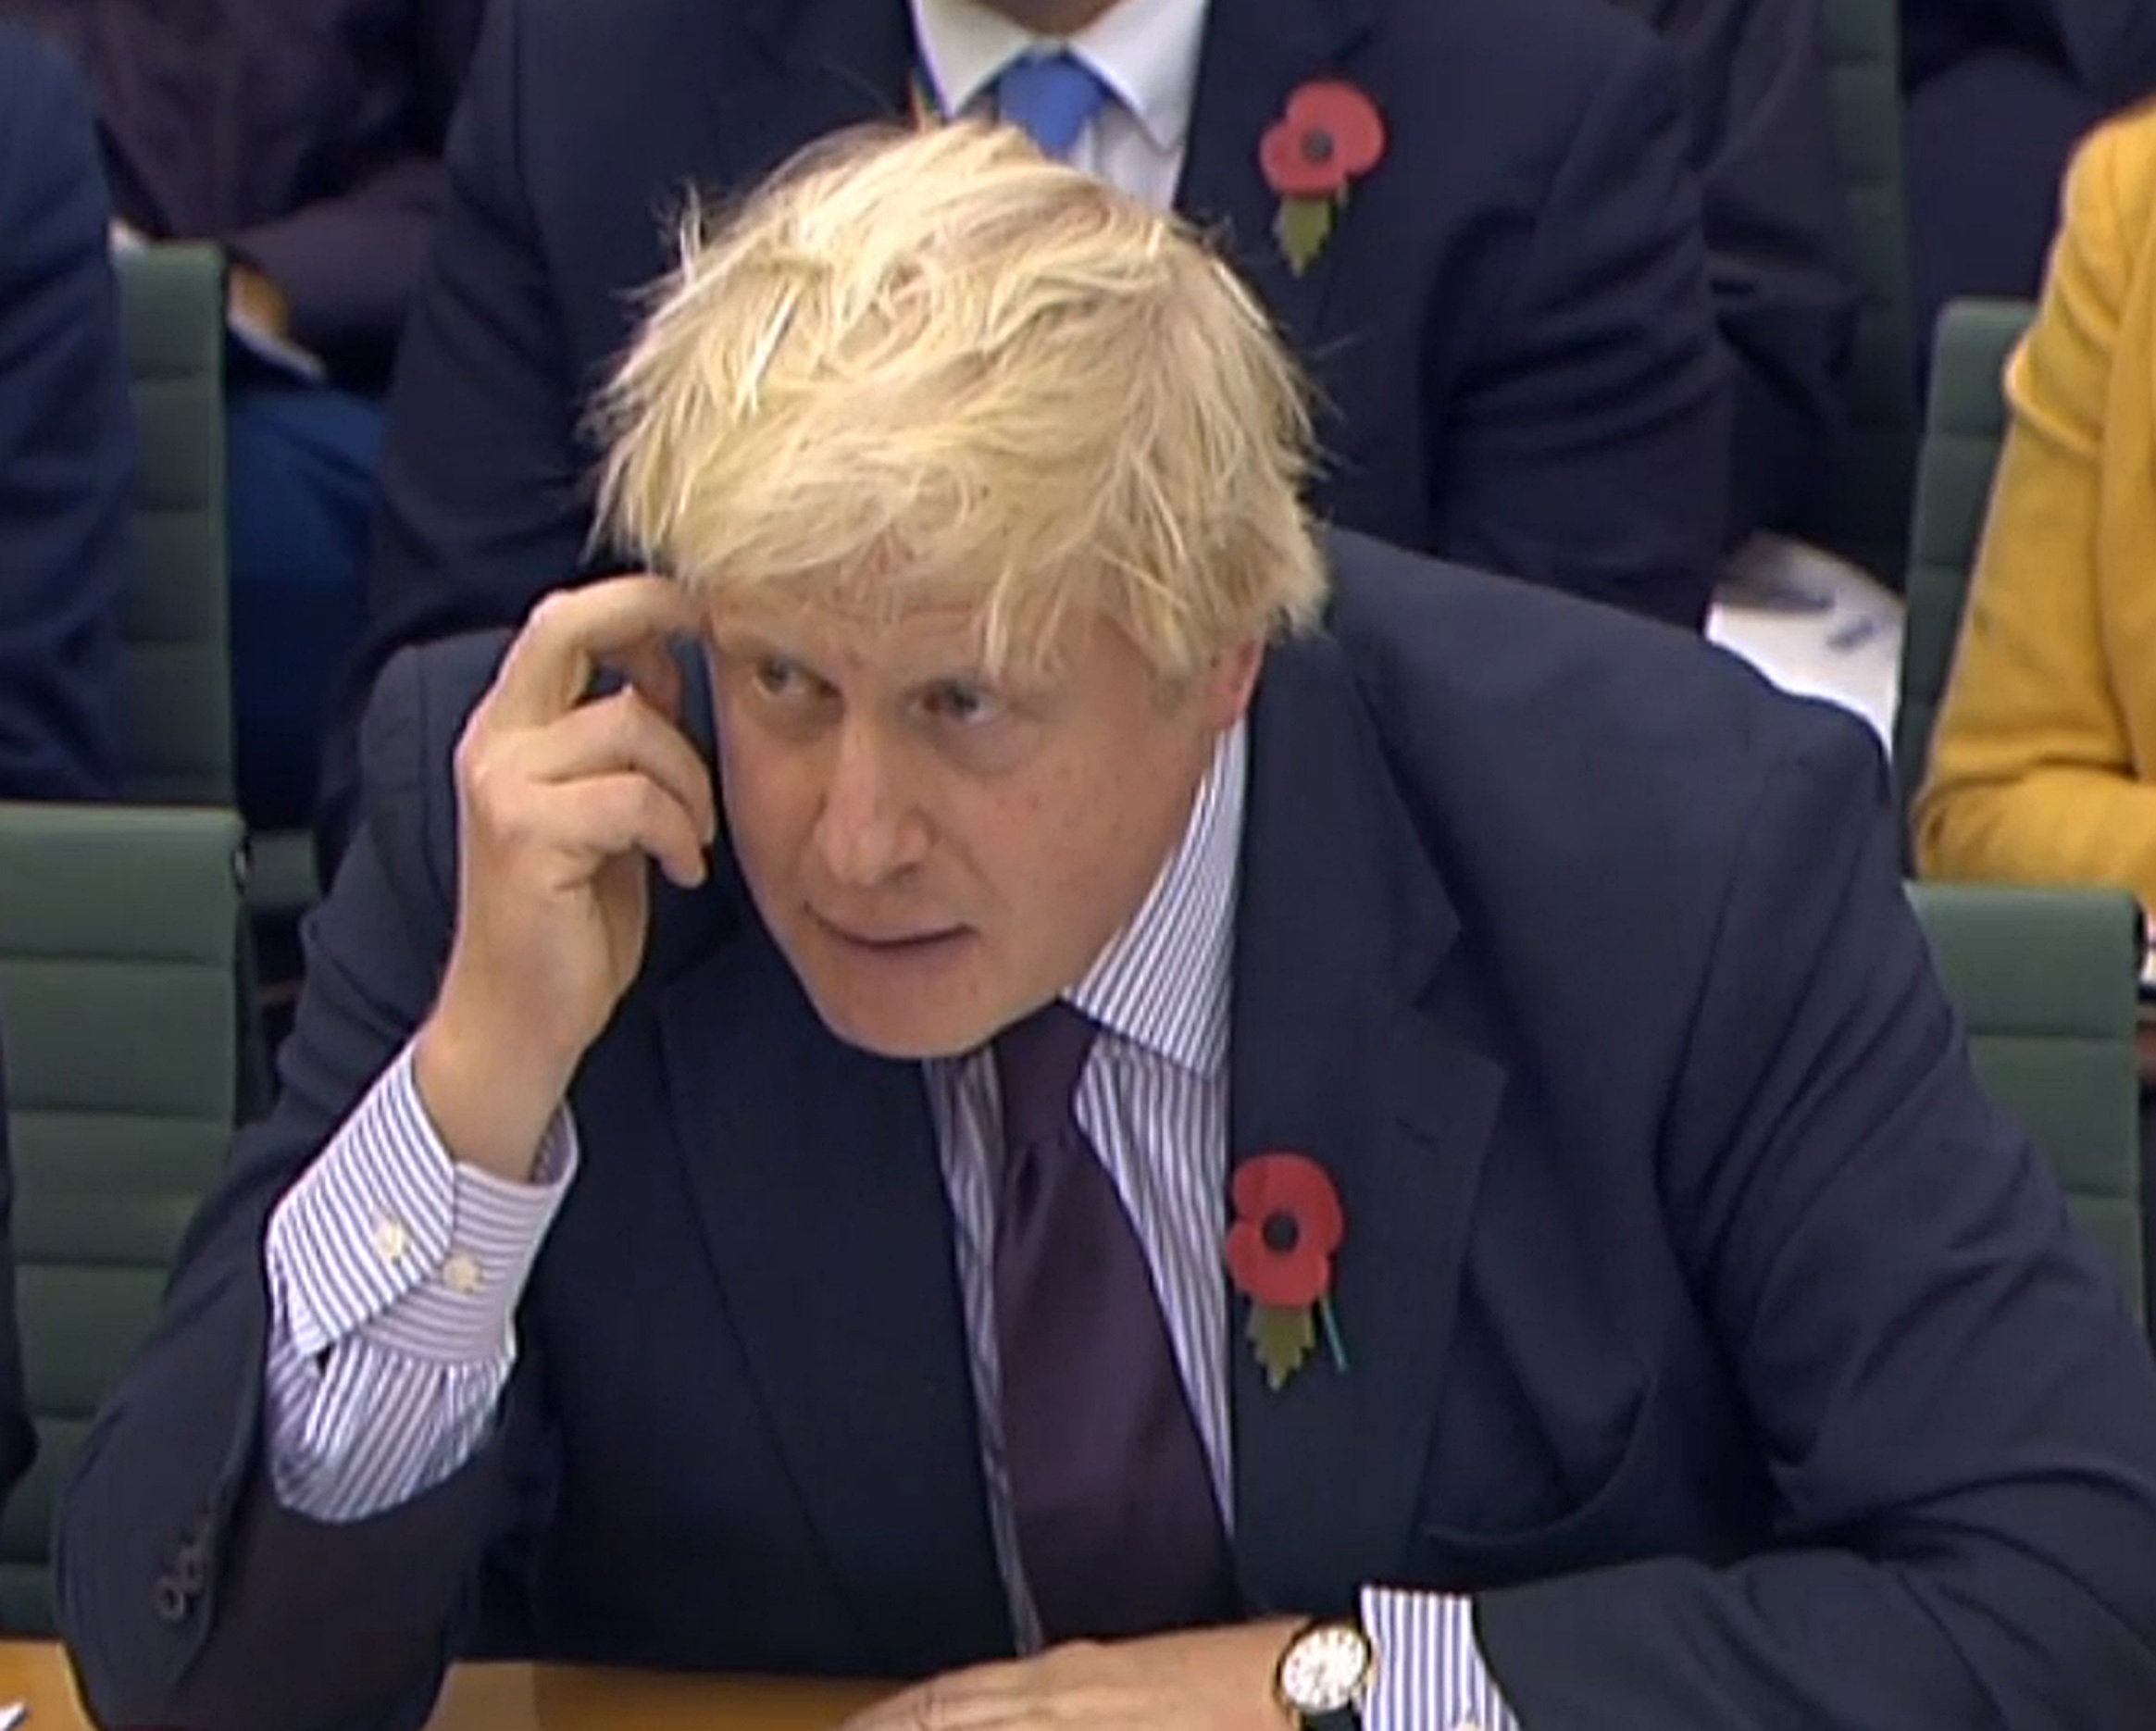 <strong>Foreign Secretary Boris Johnson's remarks that&nbsp;Zaghari-Ratcliffe was 'training journalists' have caused a political storm and&nbsp;<a href="http://www.huffingtonpost.co.uk/entry/boris-johnson-nazanin-zaghari-ratcliffe_uk_5a03fedbe4b03deac08b29fa?yqk&amp;utm_hp_ref=uk-homepage">provoked the Islamic Republic to interpret them as a &ldquo;confession&rdquo;</a></strong>